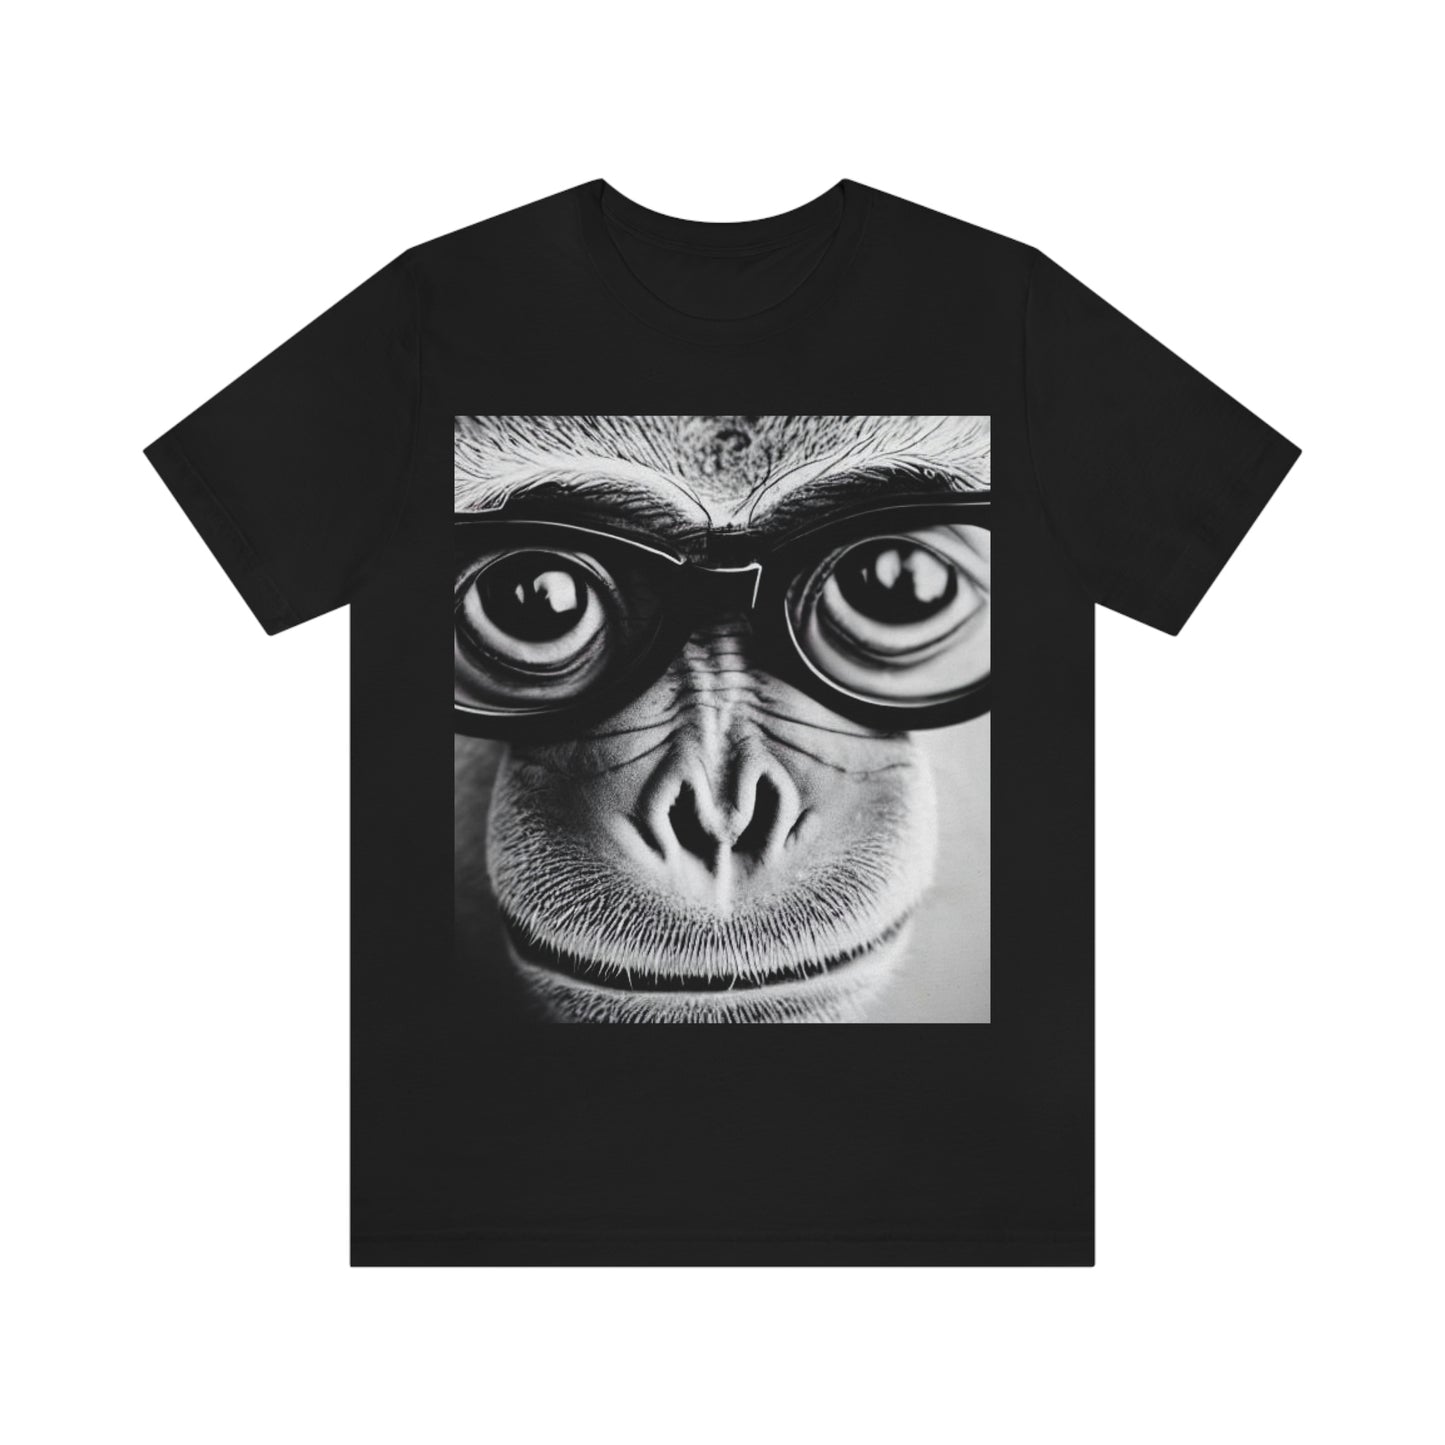 Monkey Life T-Shirt │Made in USA │Unisex - Men and Women's Cotton Tee │Monkey Wearing Glasses